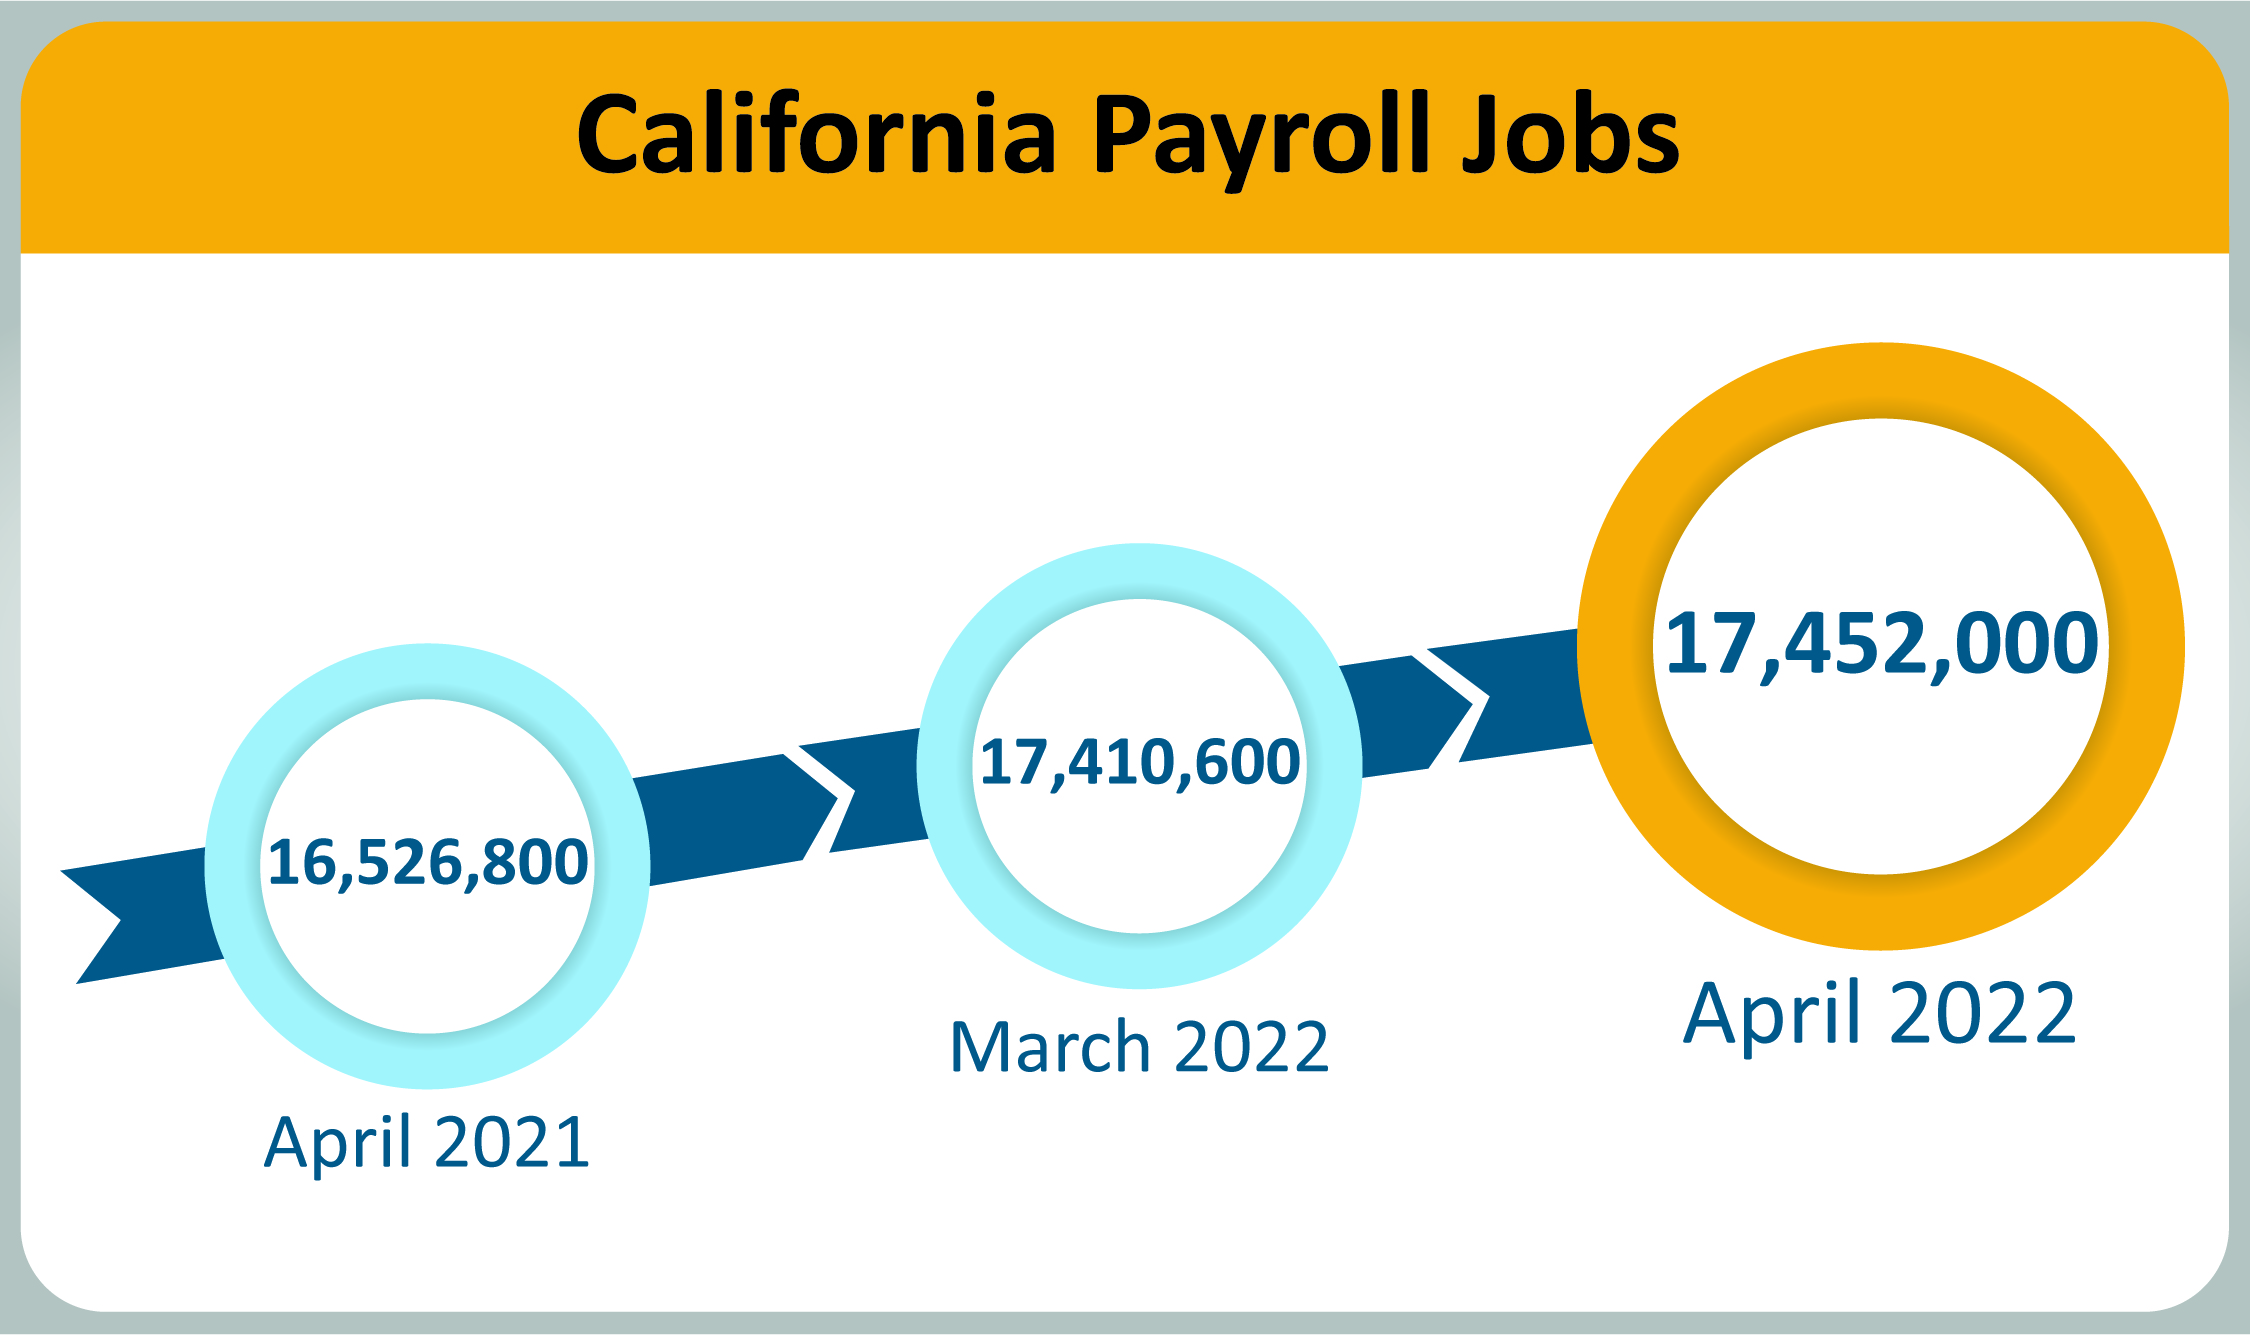 California payroll jobs totaled 17,452,000 in April 2022, up from 16,526,800 in April 2021.